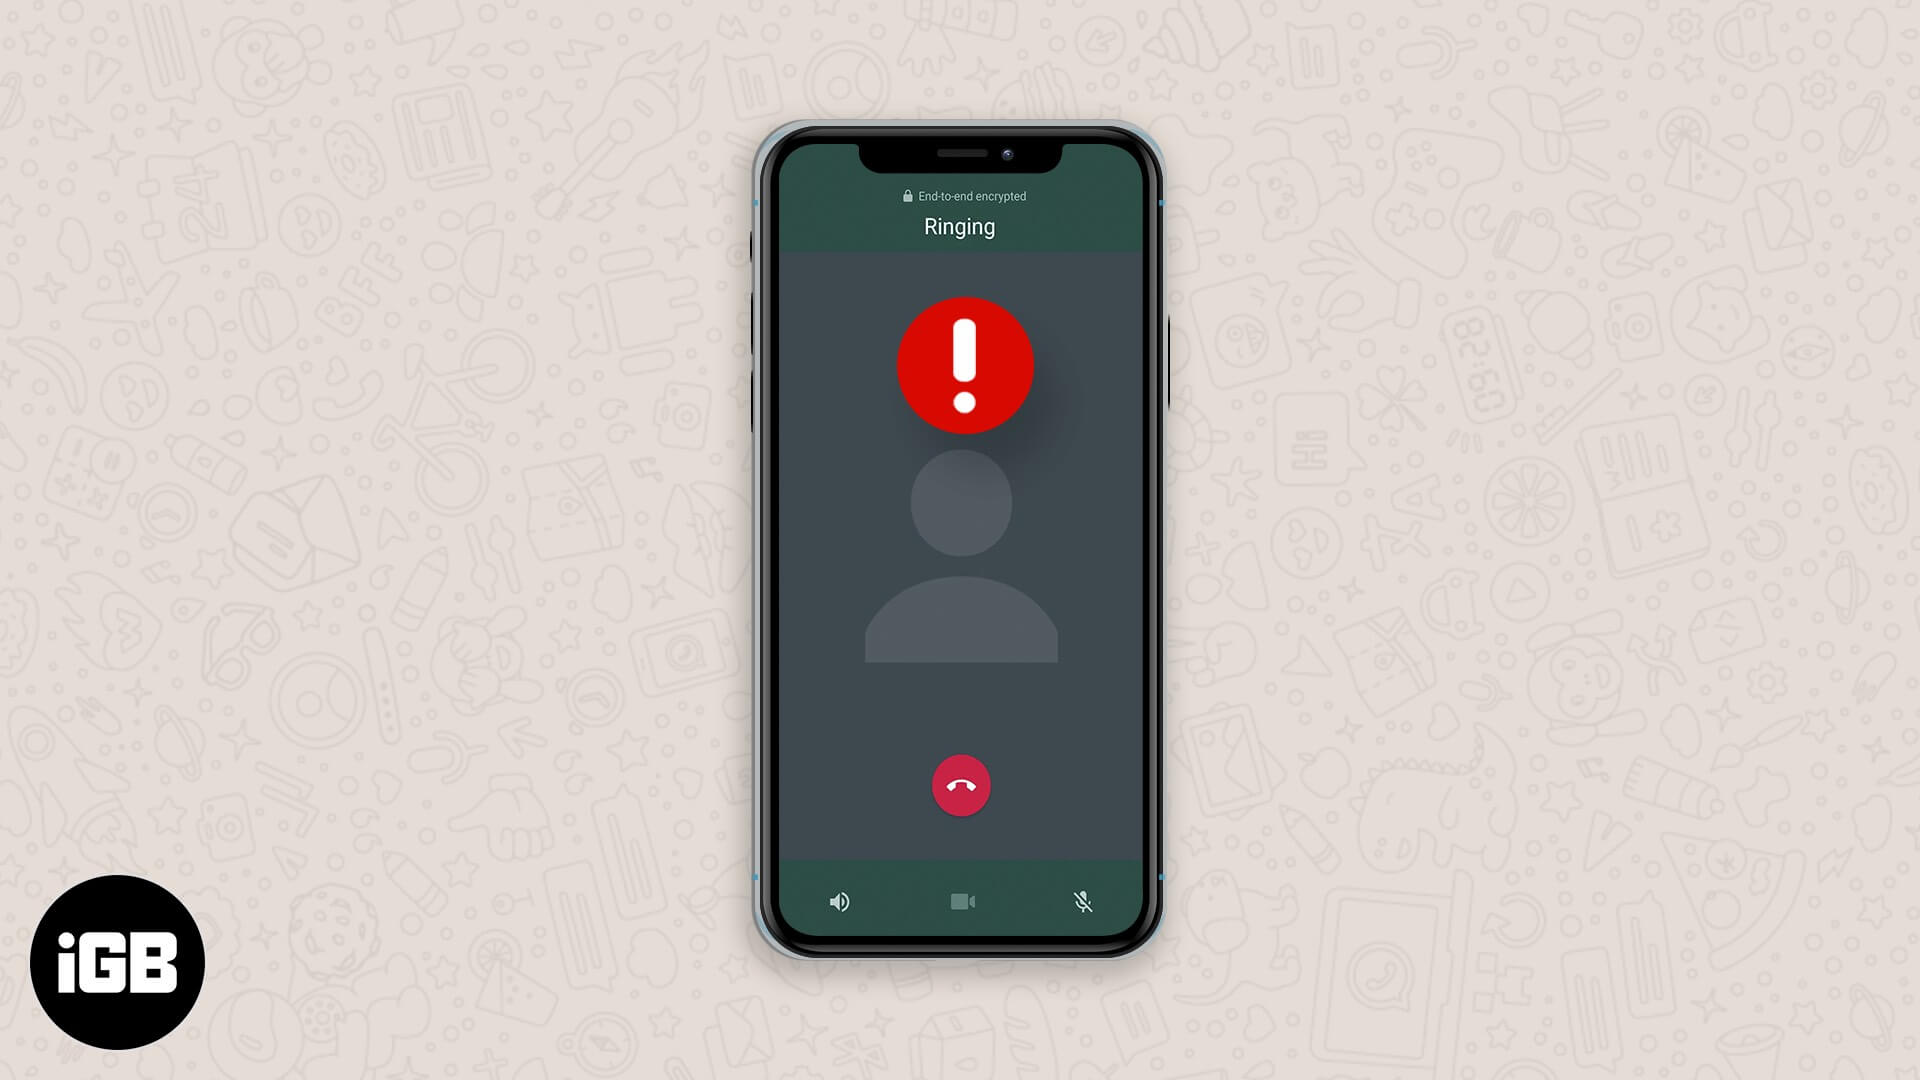 How To Disable Calling in WhatsApp